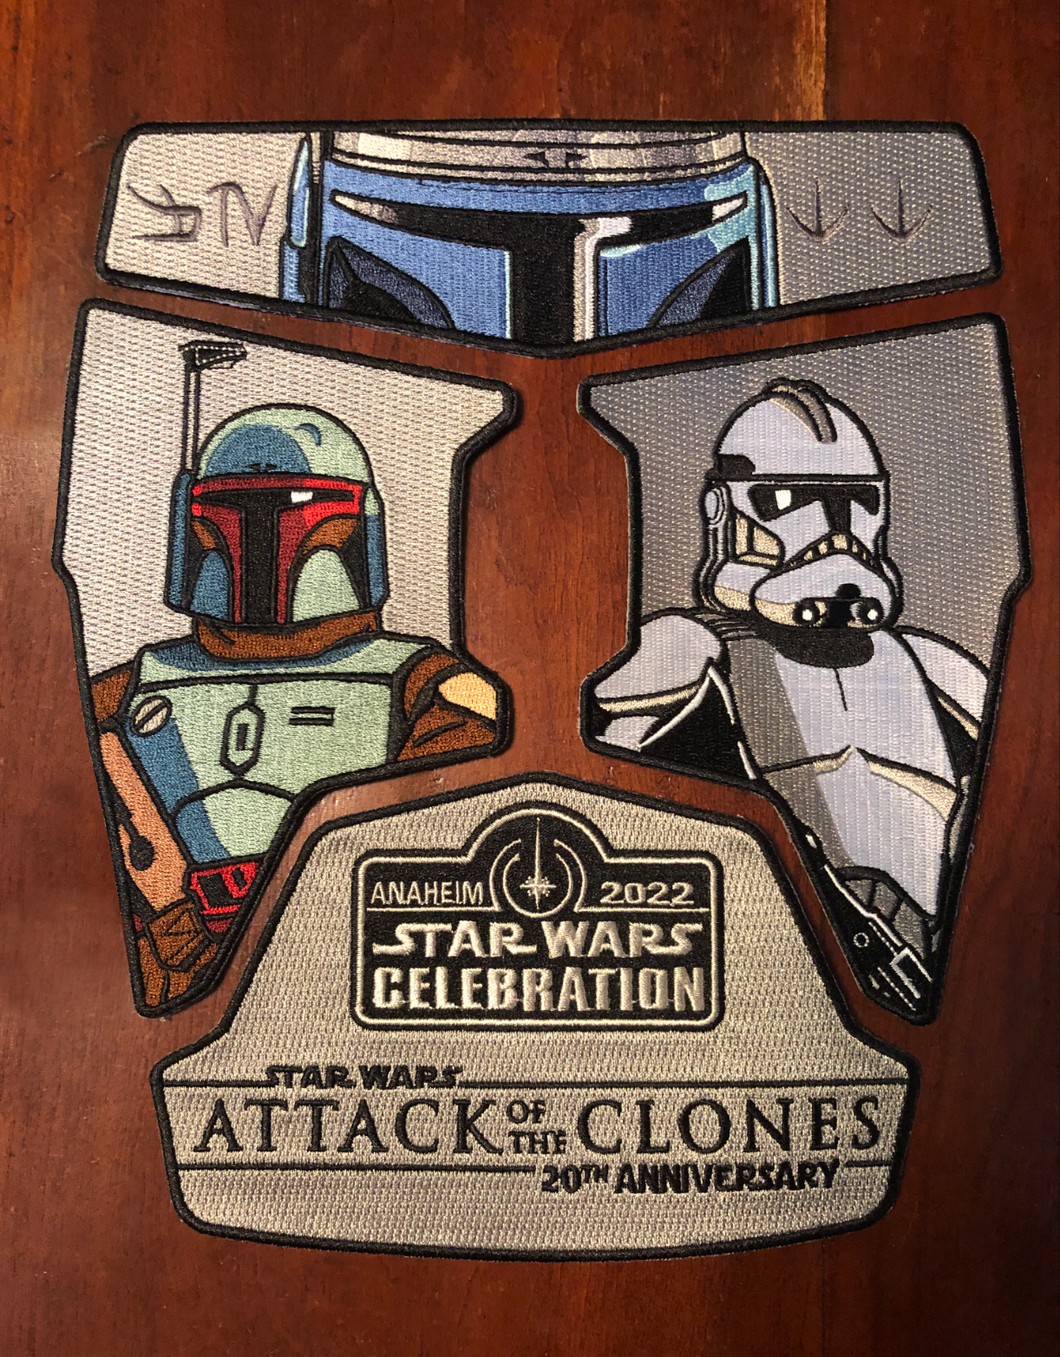 20th anniversary patch